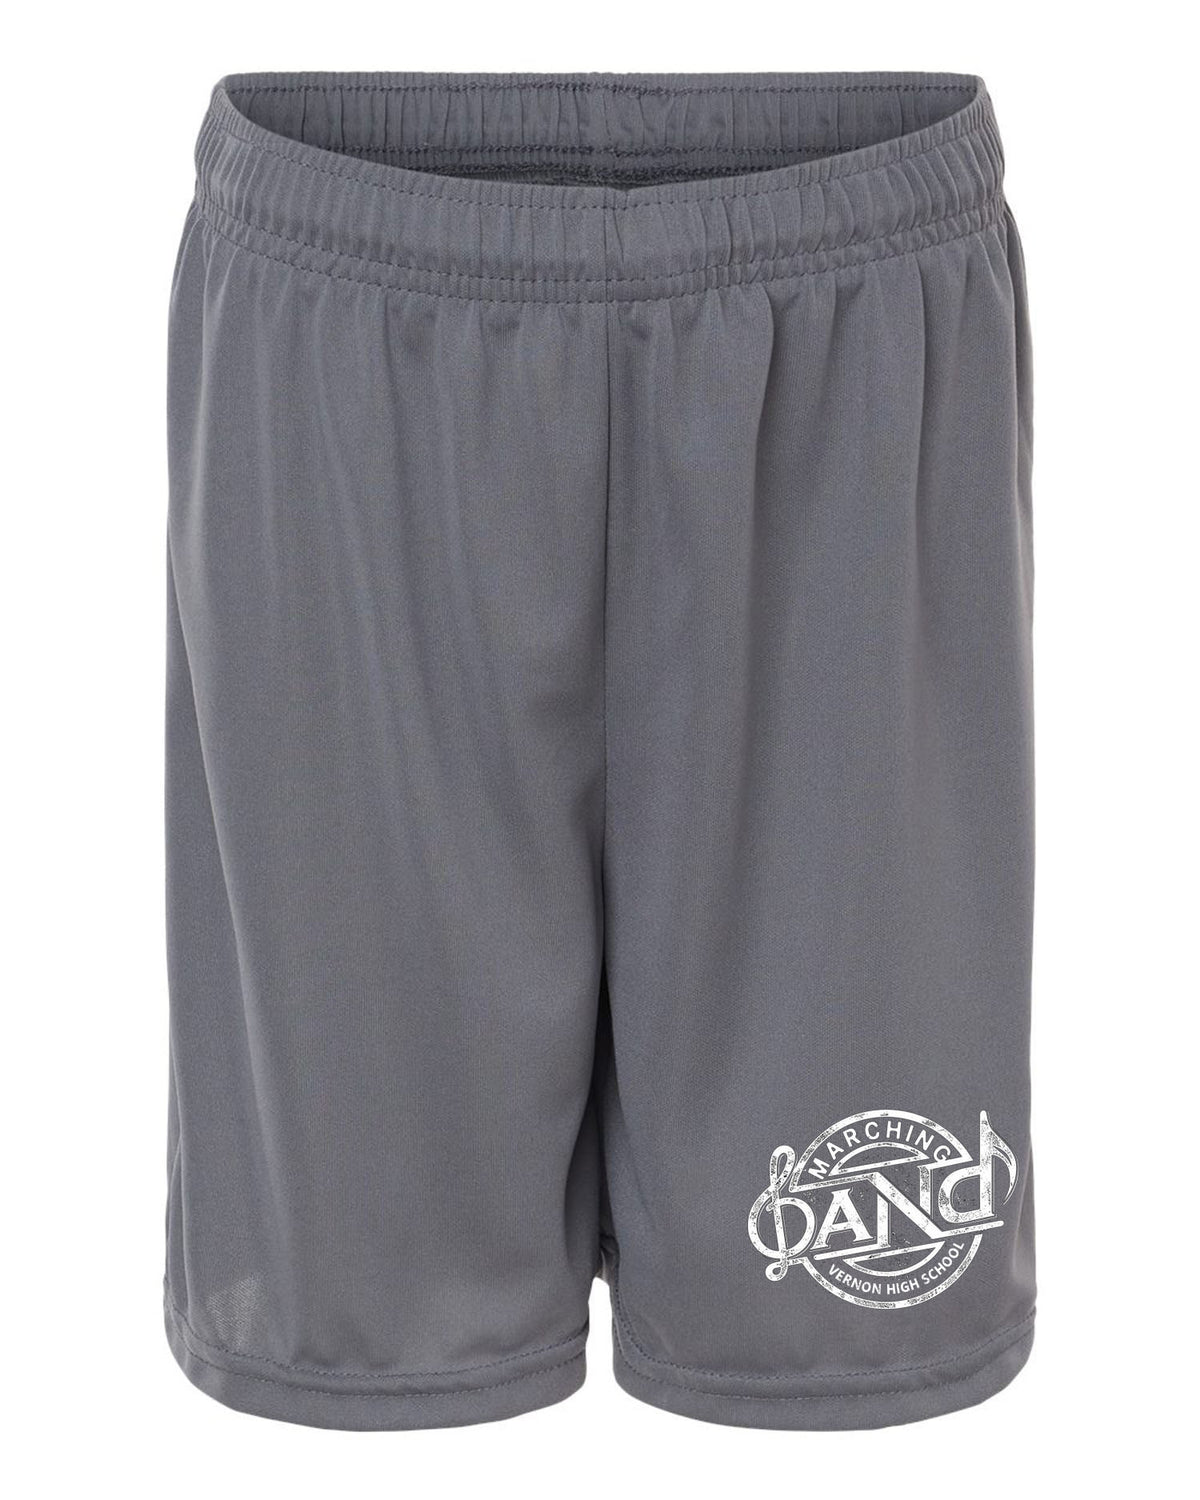 Vernon Marching Band Performance Shorts Design 1